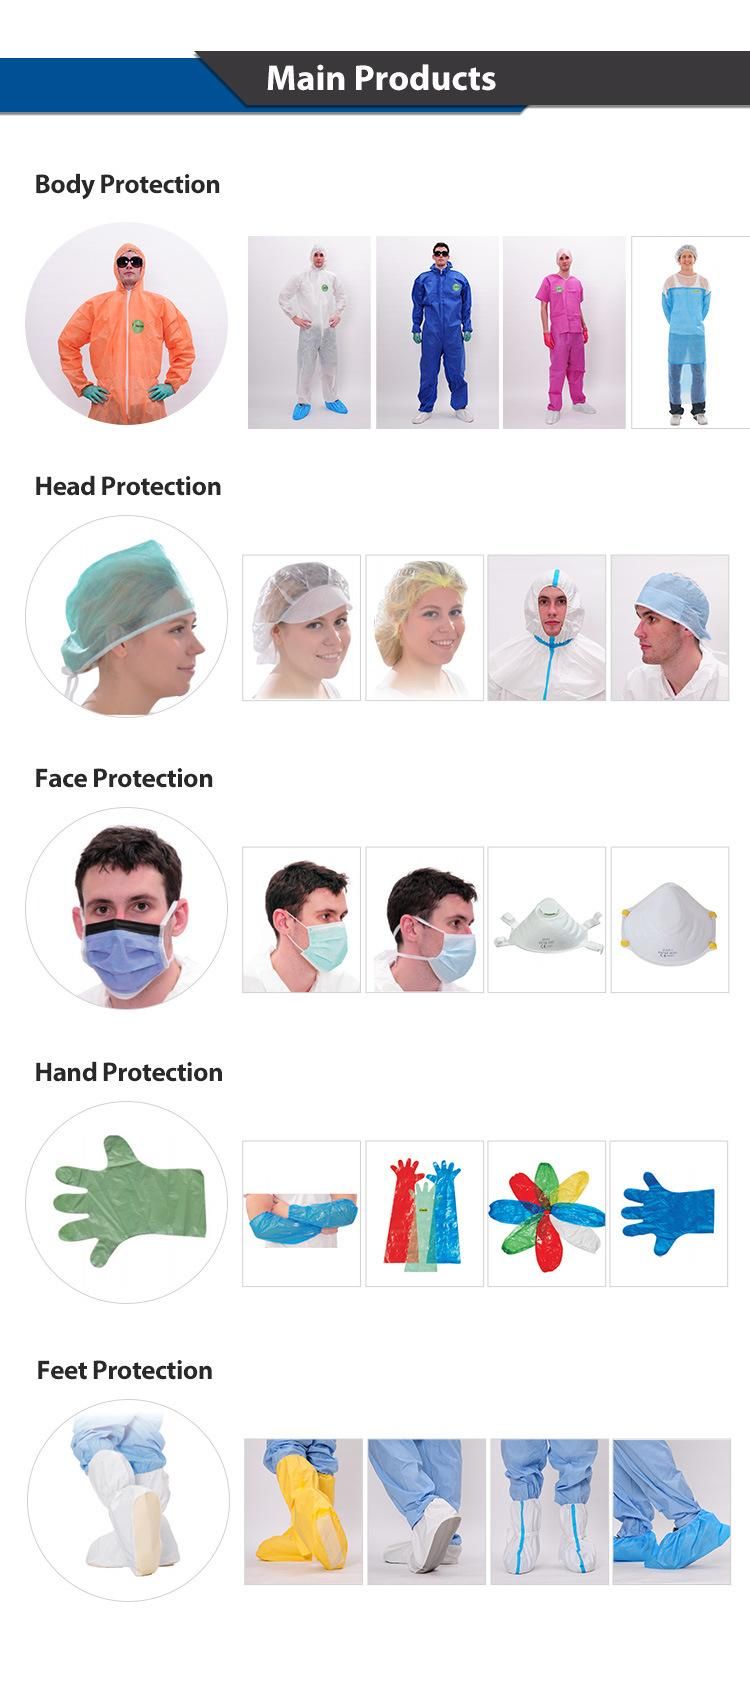 Hospital Nonwoven Surgical Cap Disposable Surgeon Caps with Tie Back